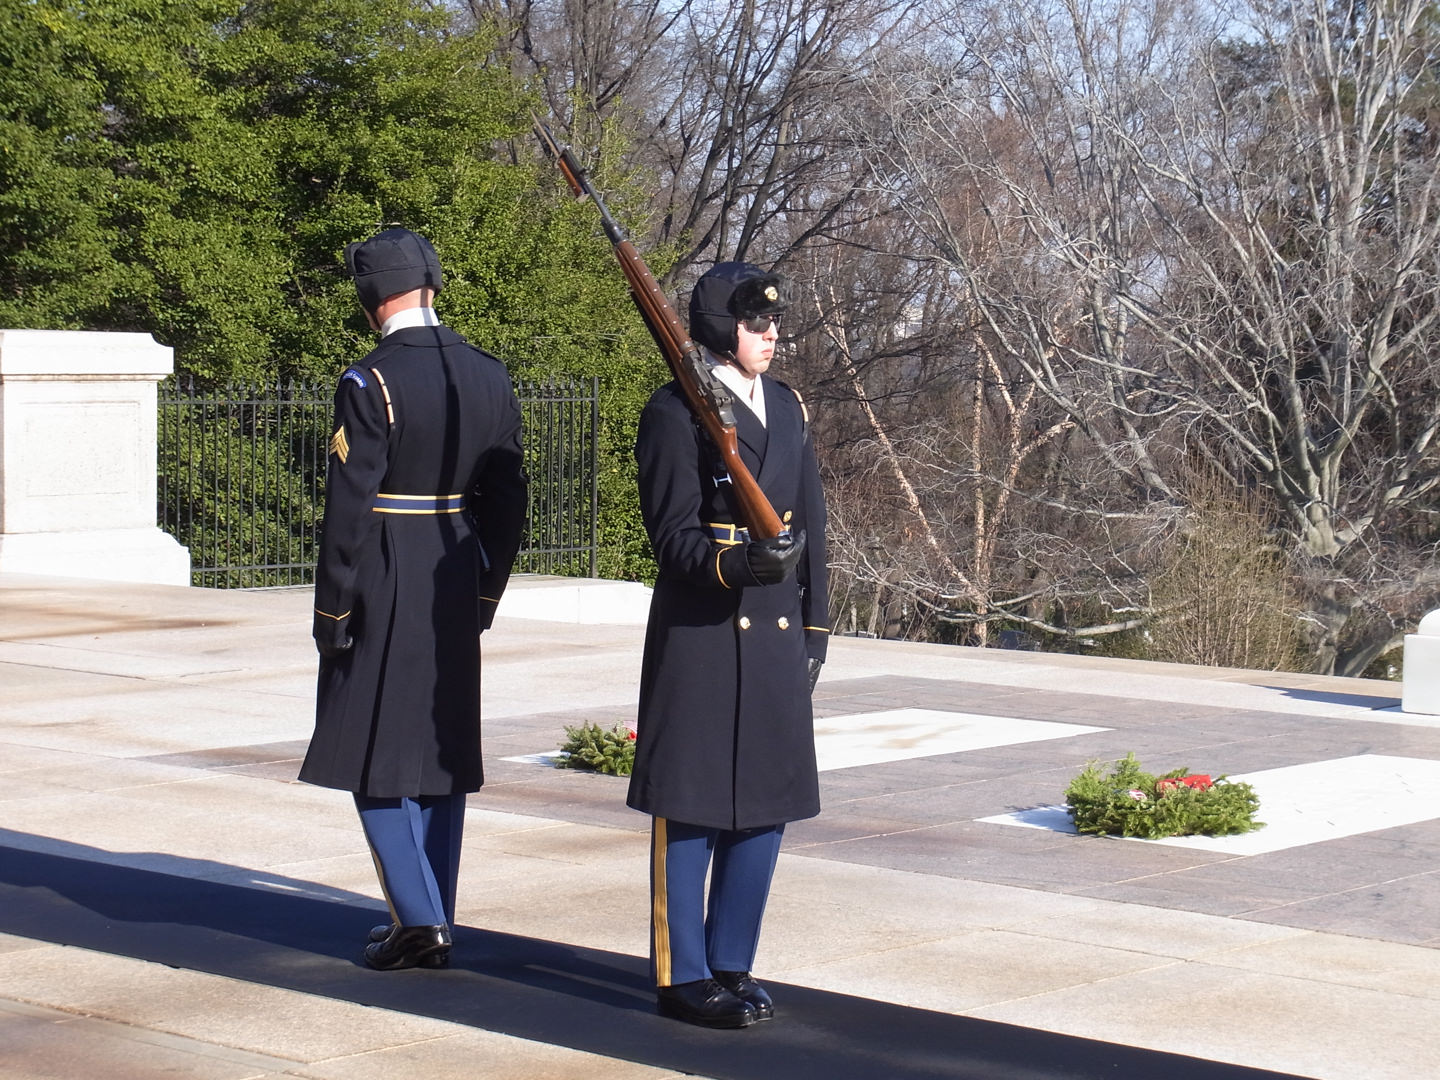 Changing of the Guard at the Grave of the Unknown Soldier